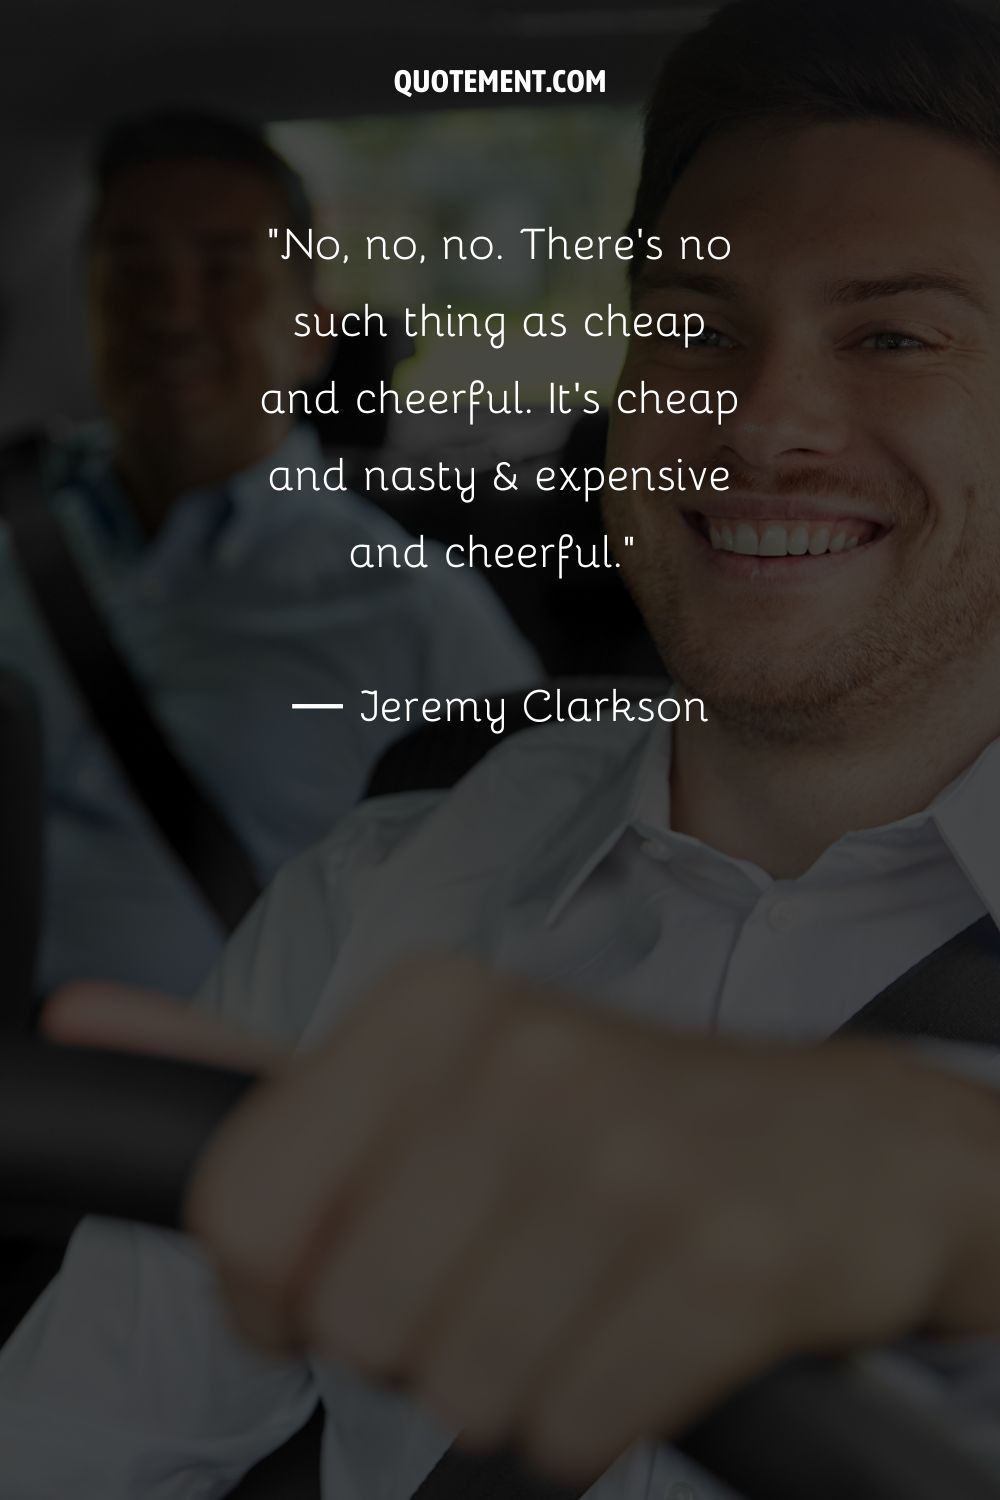 No, no, no. There's no such thing as cheap and cheerful. It's cheap and nasty & expensive and cheerful